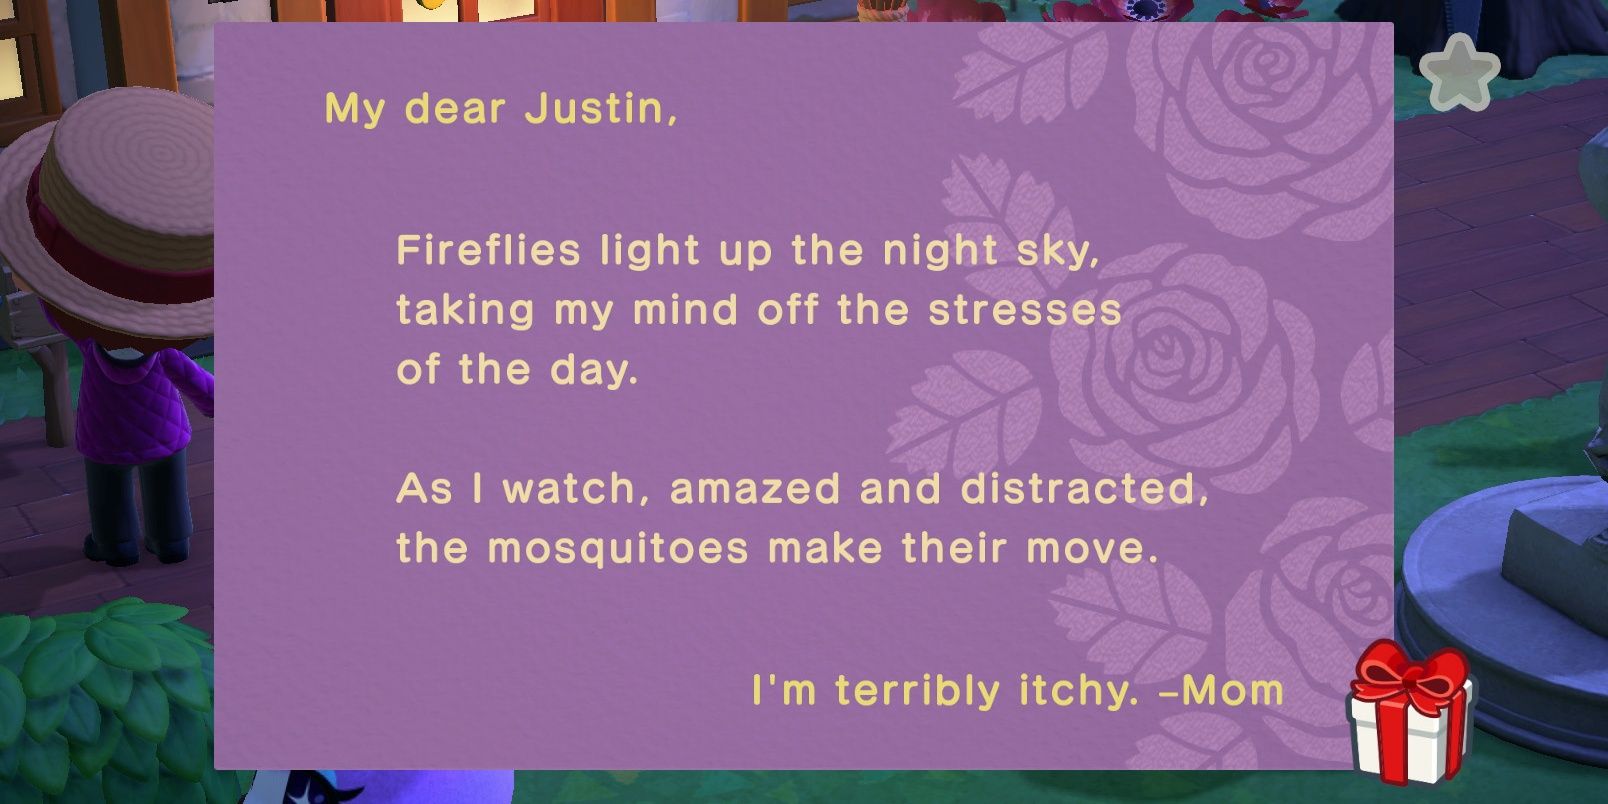 A letter from Animal Crossing Mom with a poem about mosquitoes